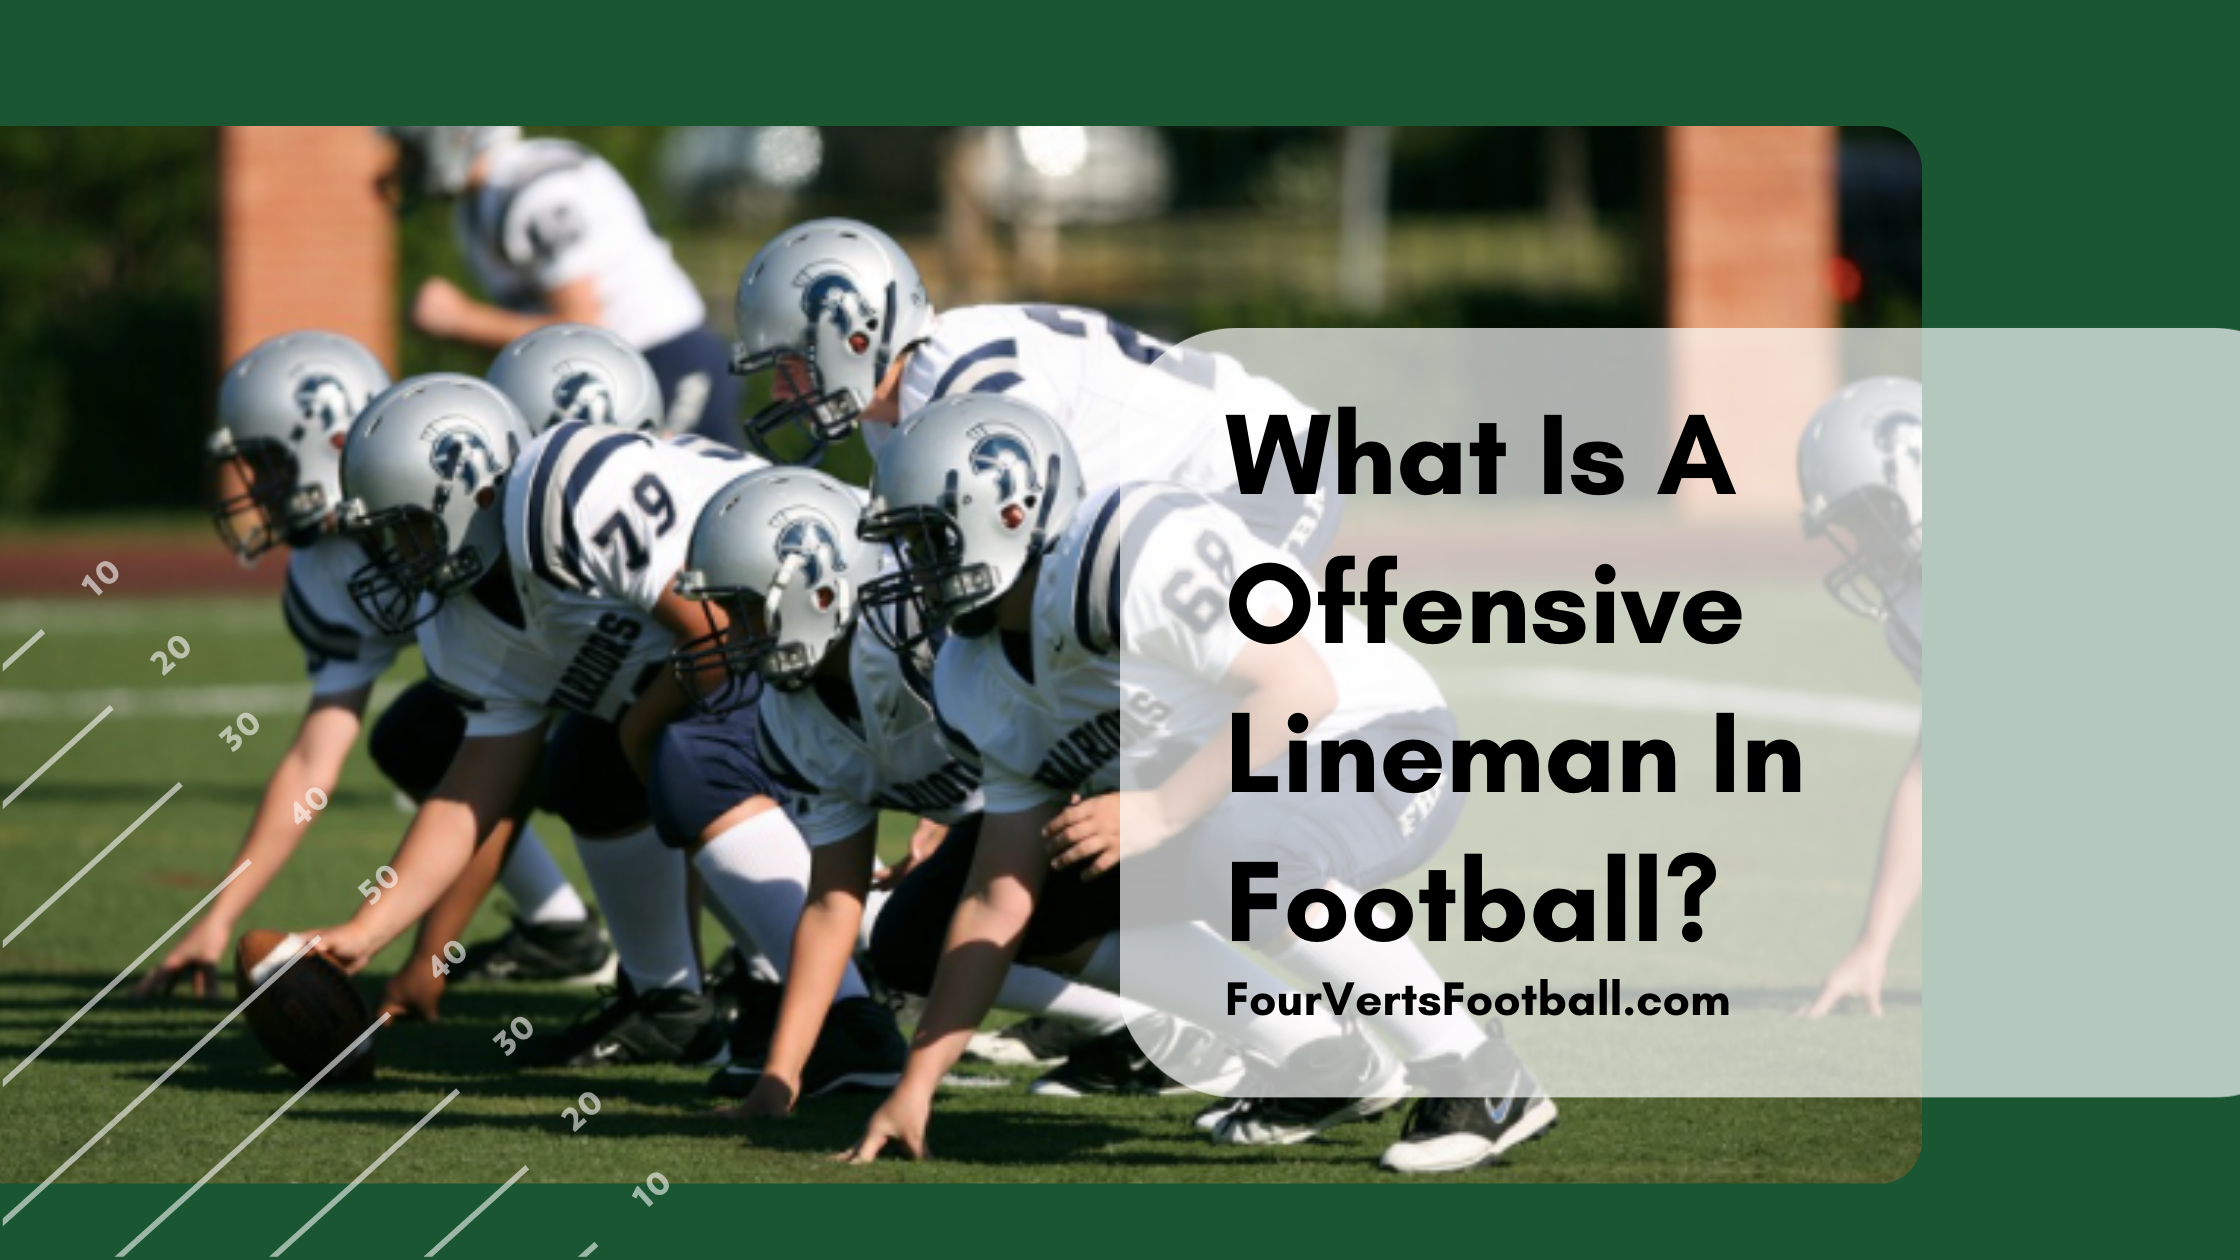 What Is An Offensive Lineman In Football?